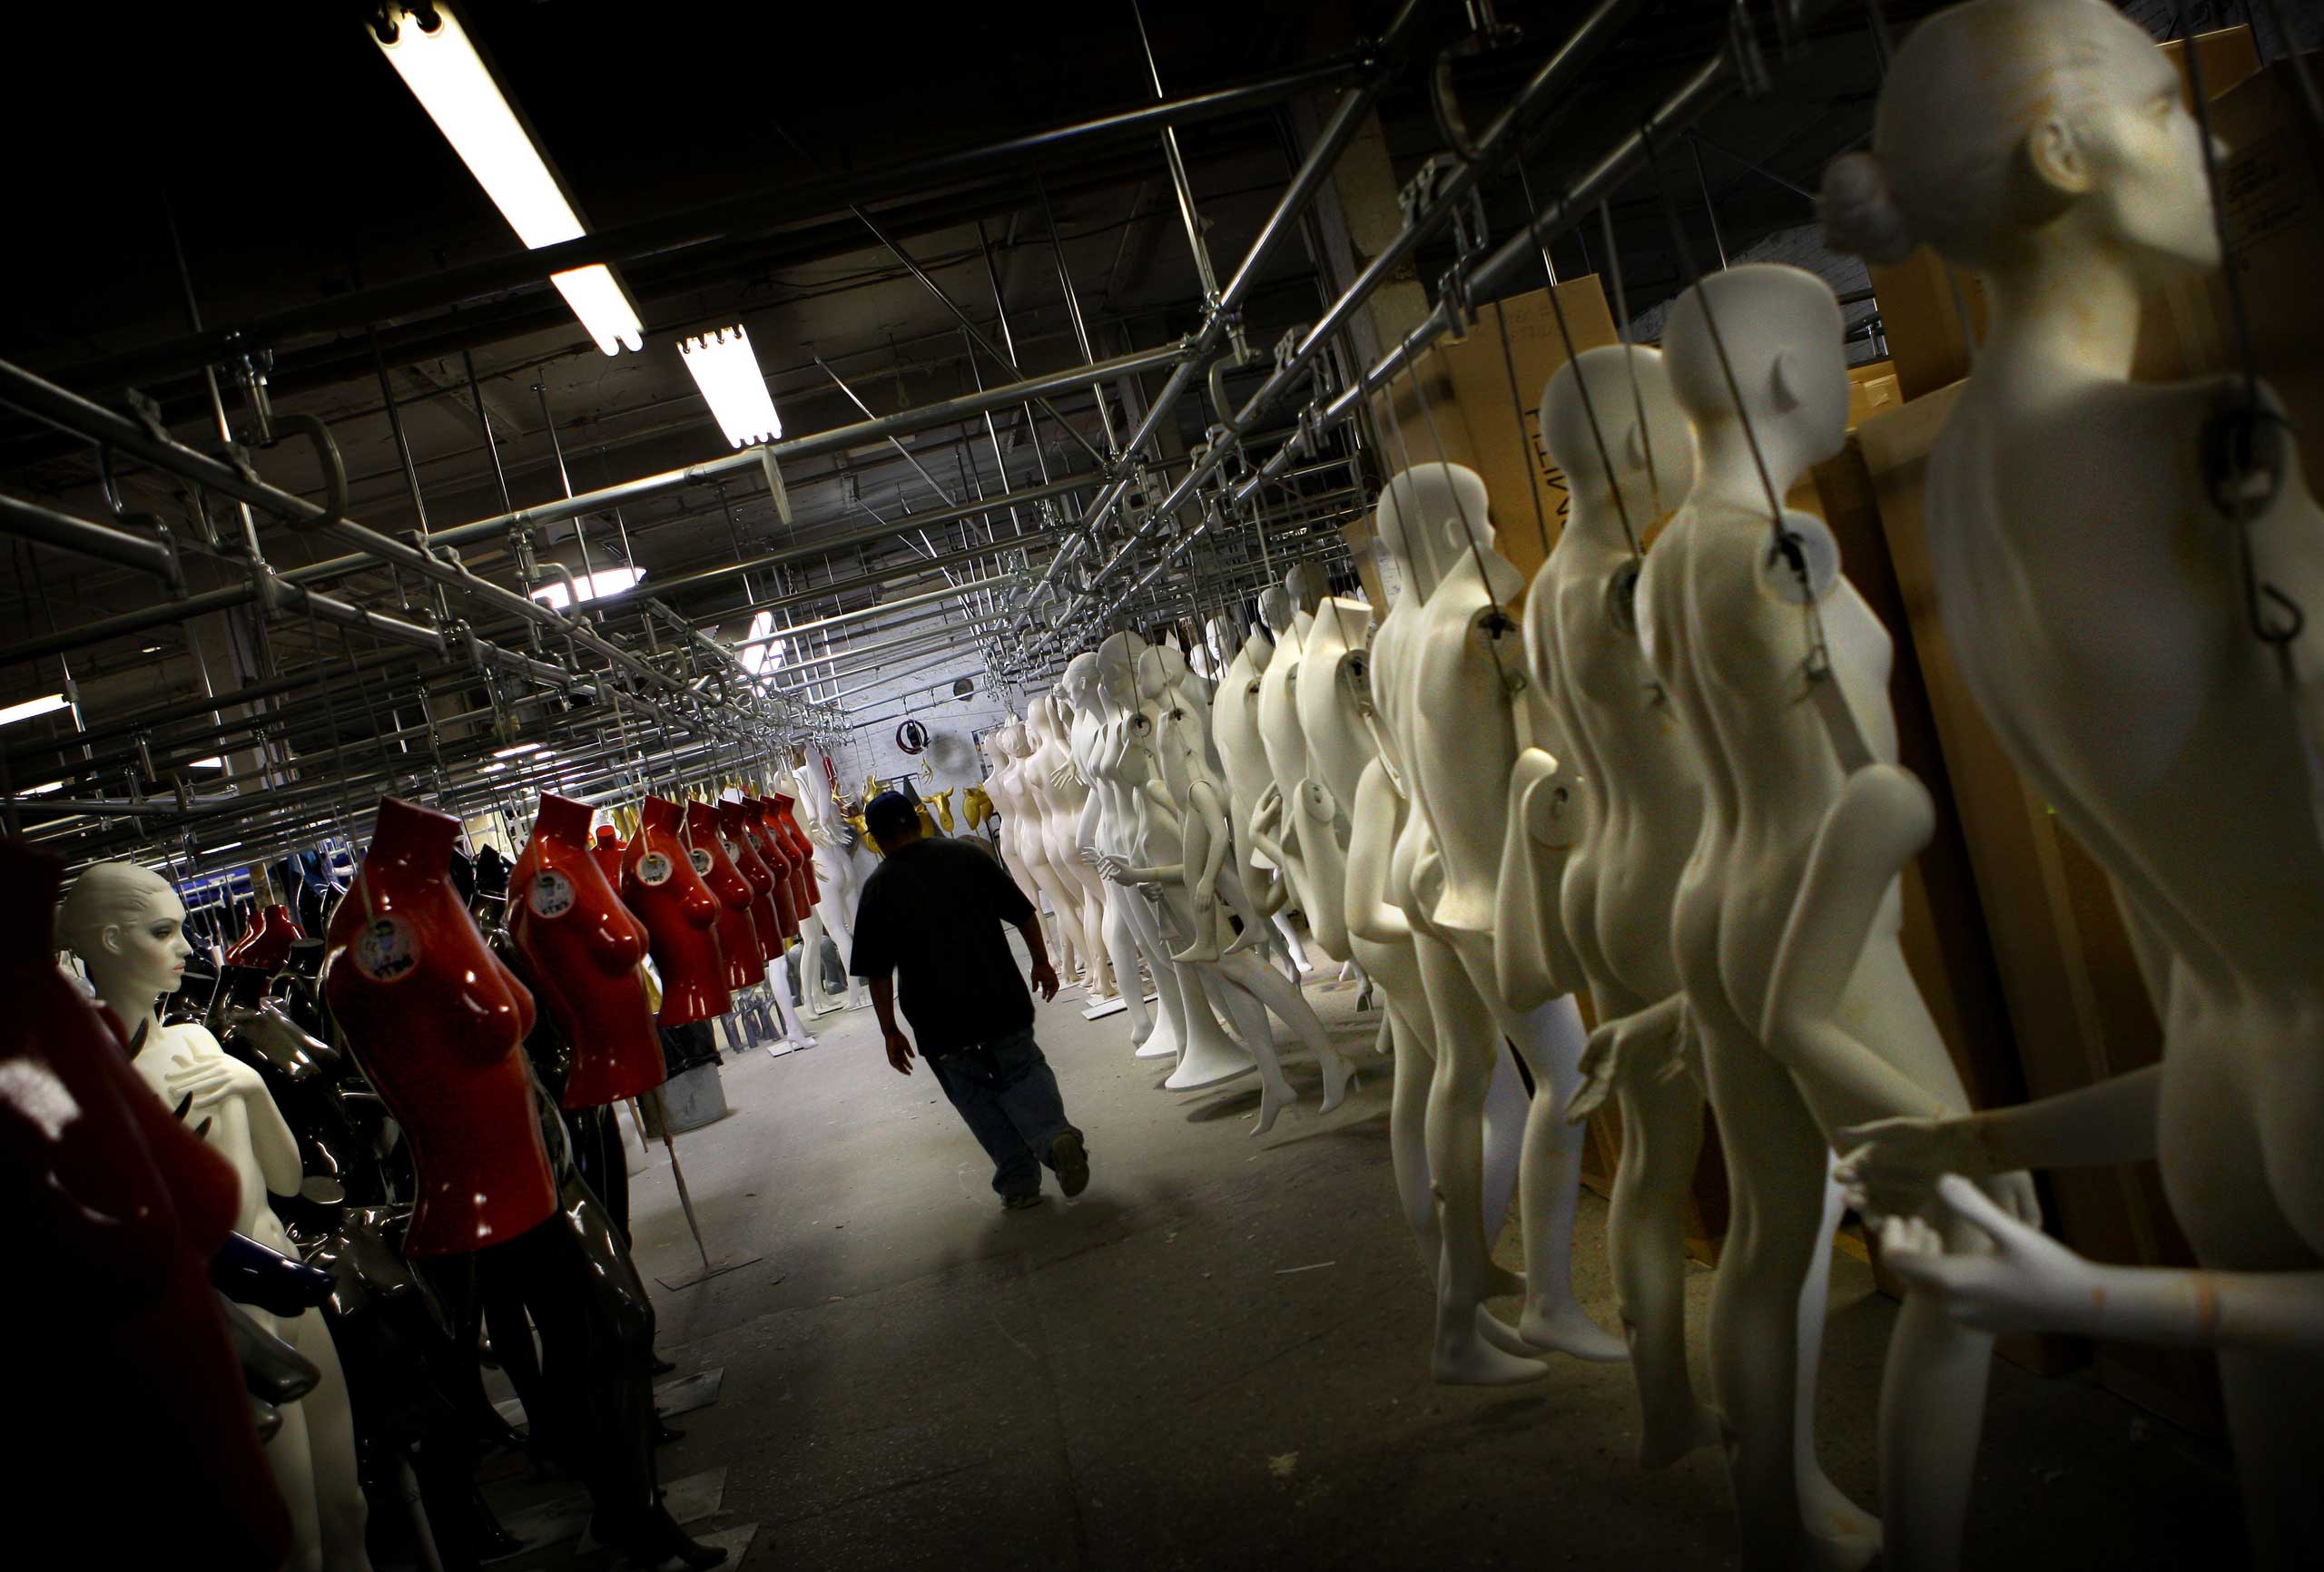 A Goldsmith employee walks next to a line of mannequins at the Goldsmith factory in New York.